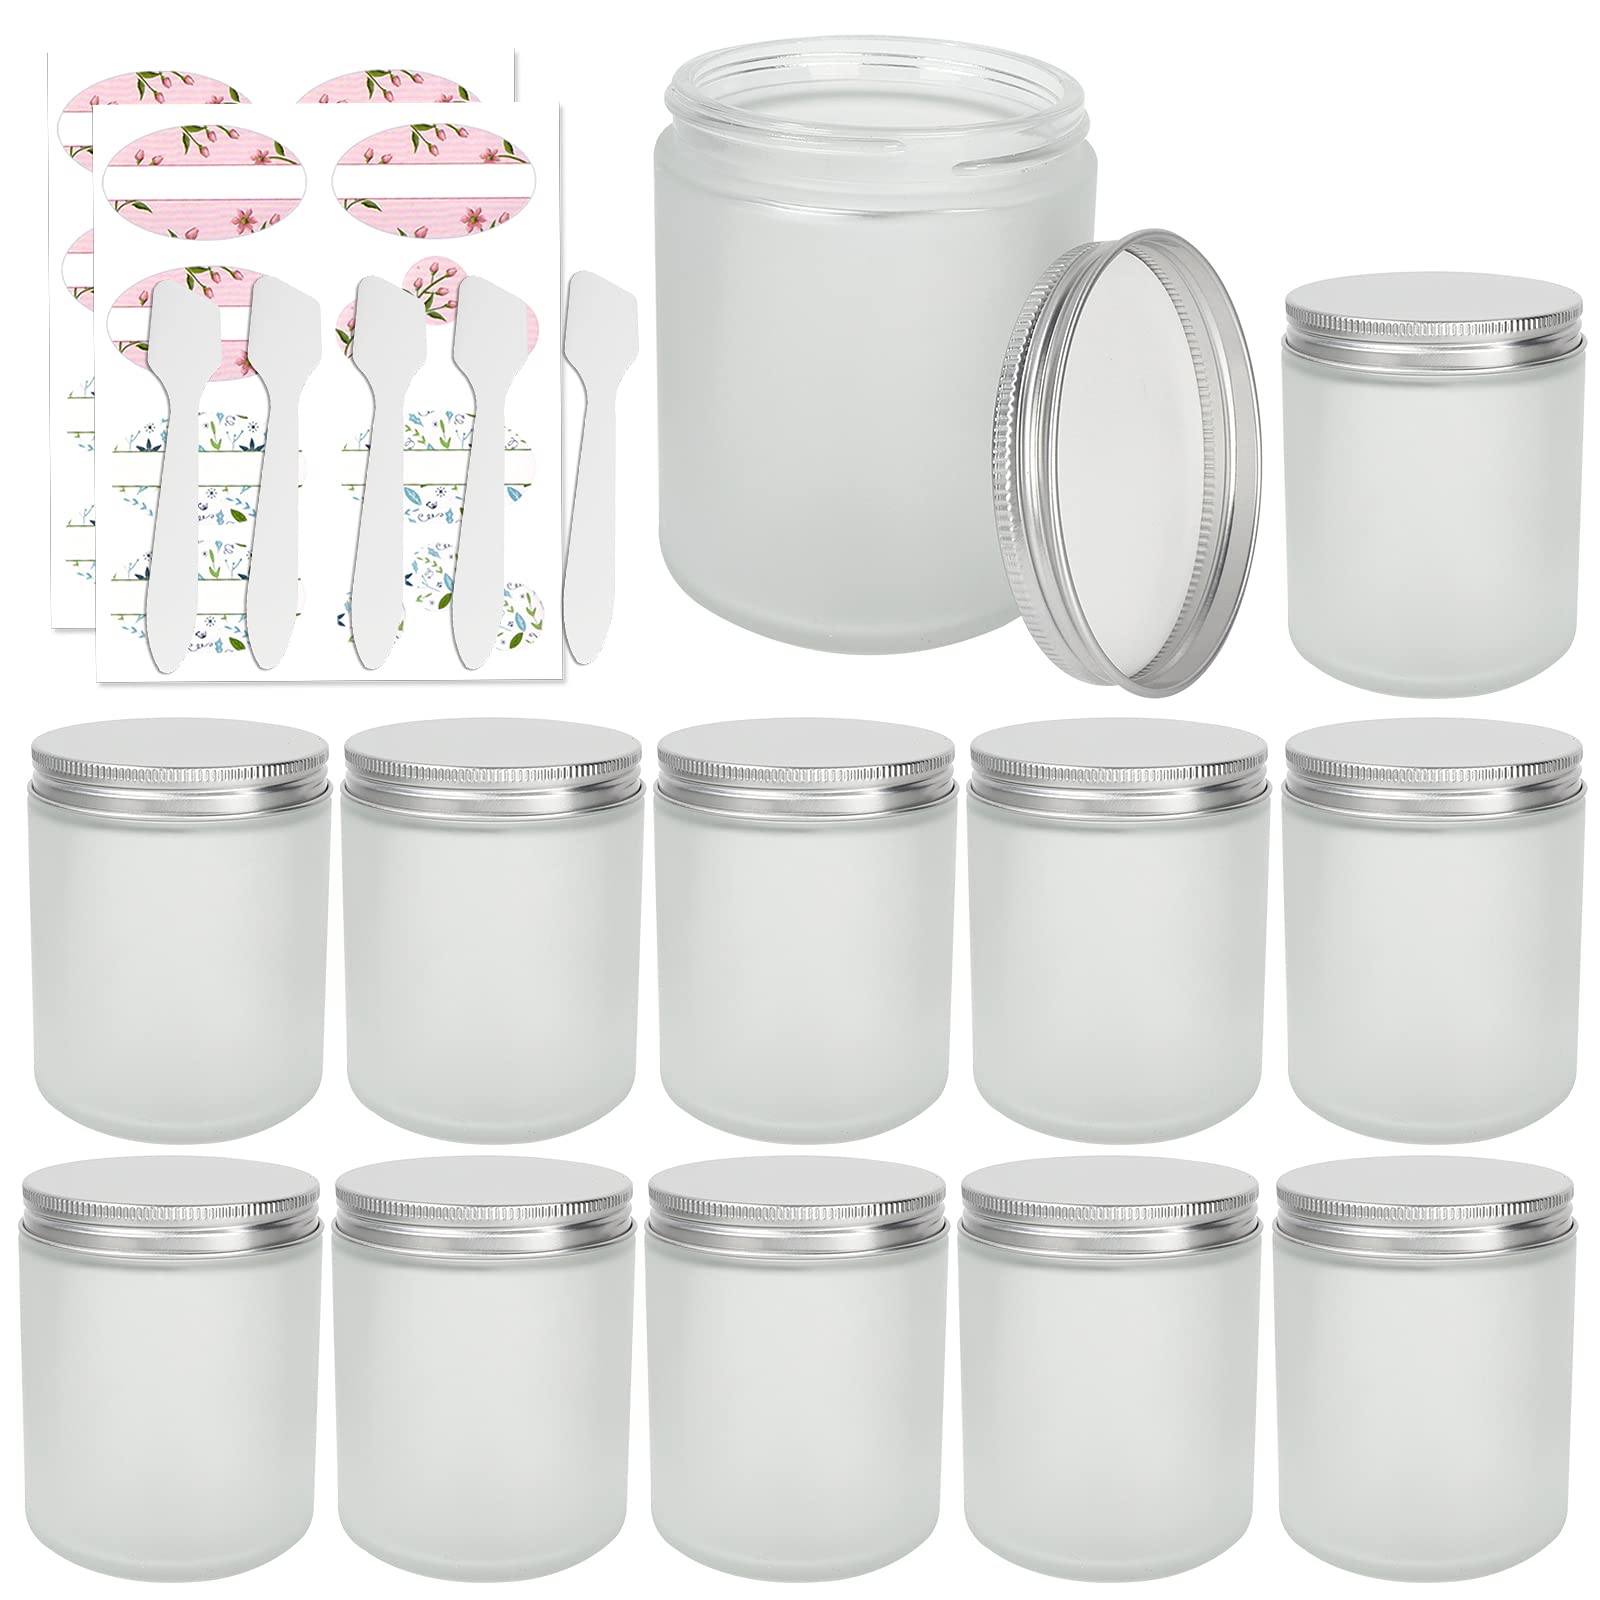 12 Pack 8 oz Round Frosted Glass Jars with Silver Metal Lids